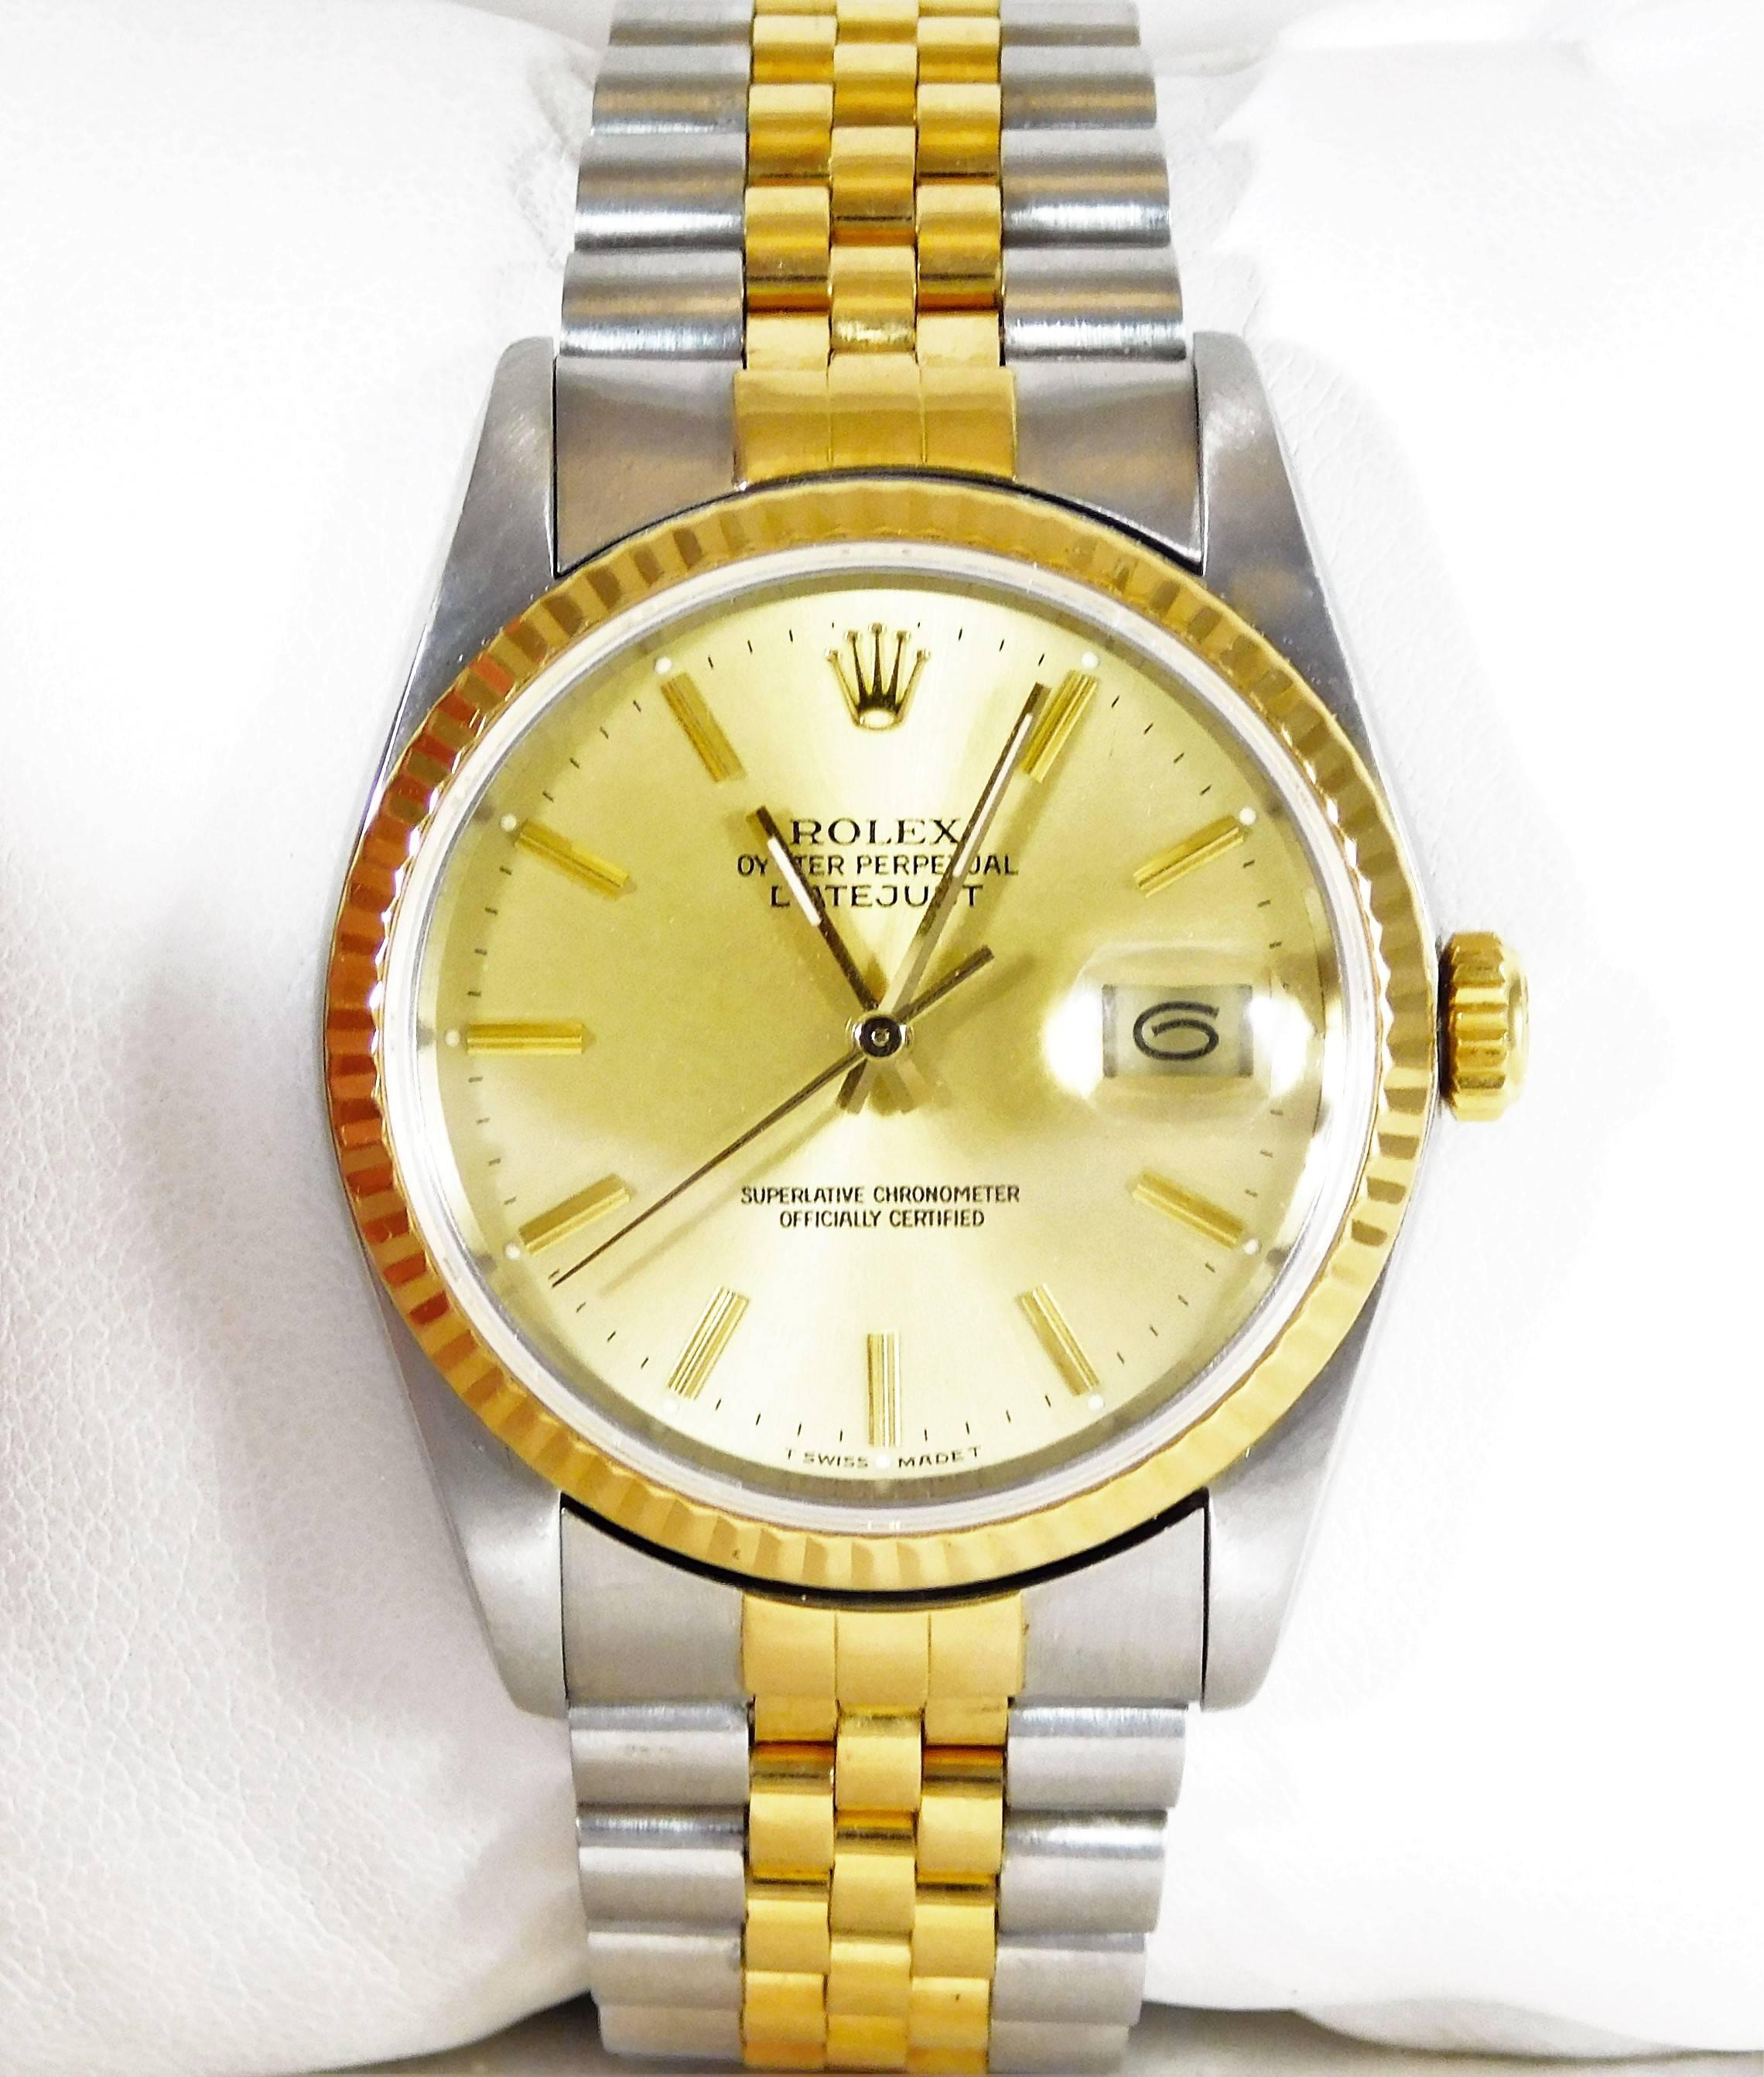 This 18kt Rolex Oyster Perpetual DateJust is in near mint condition, has been serviced/cleaned, and is in perfect working order.  The Rolex Date Oyster Perpetual DateJust is one of the most sought-after men’s luxury time pieces in the world.  It is